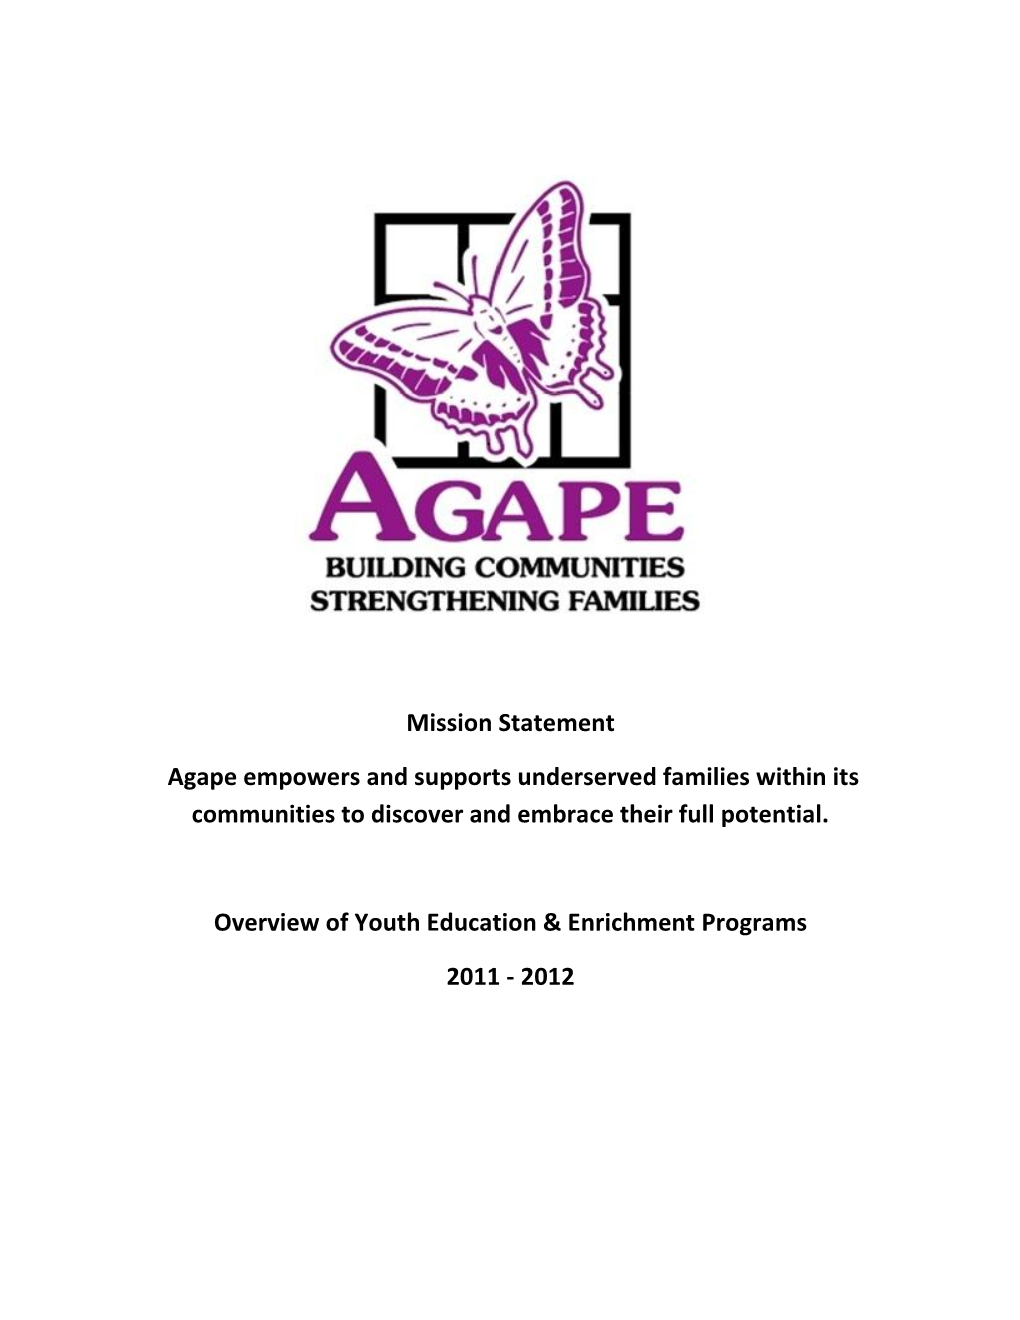 Mission Statement Agape Empowers and Supports Underserved Families